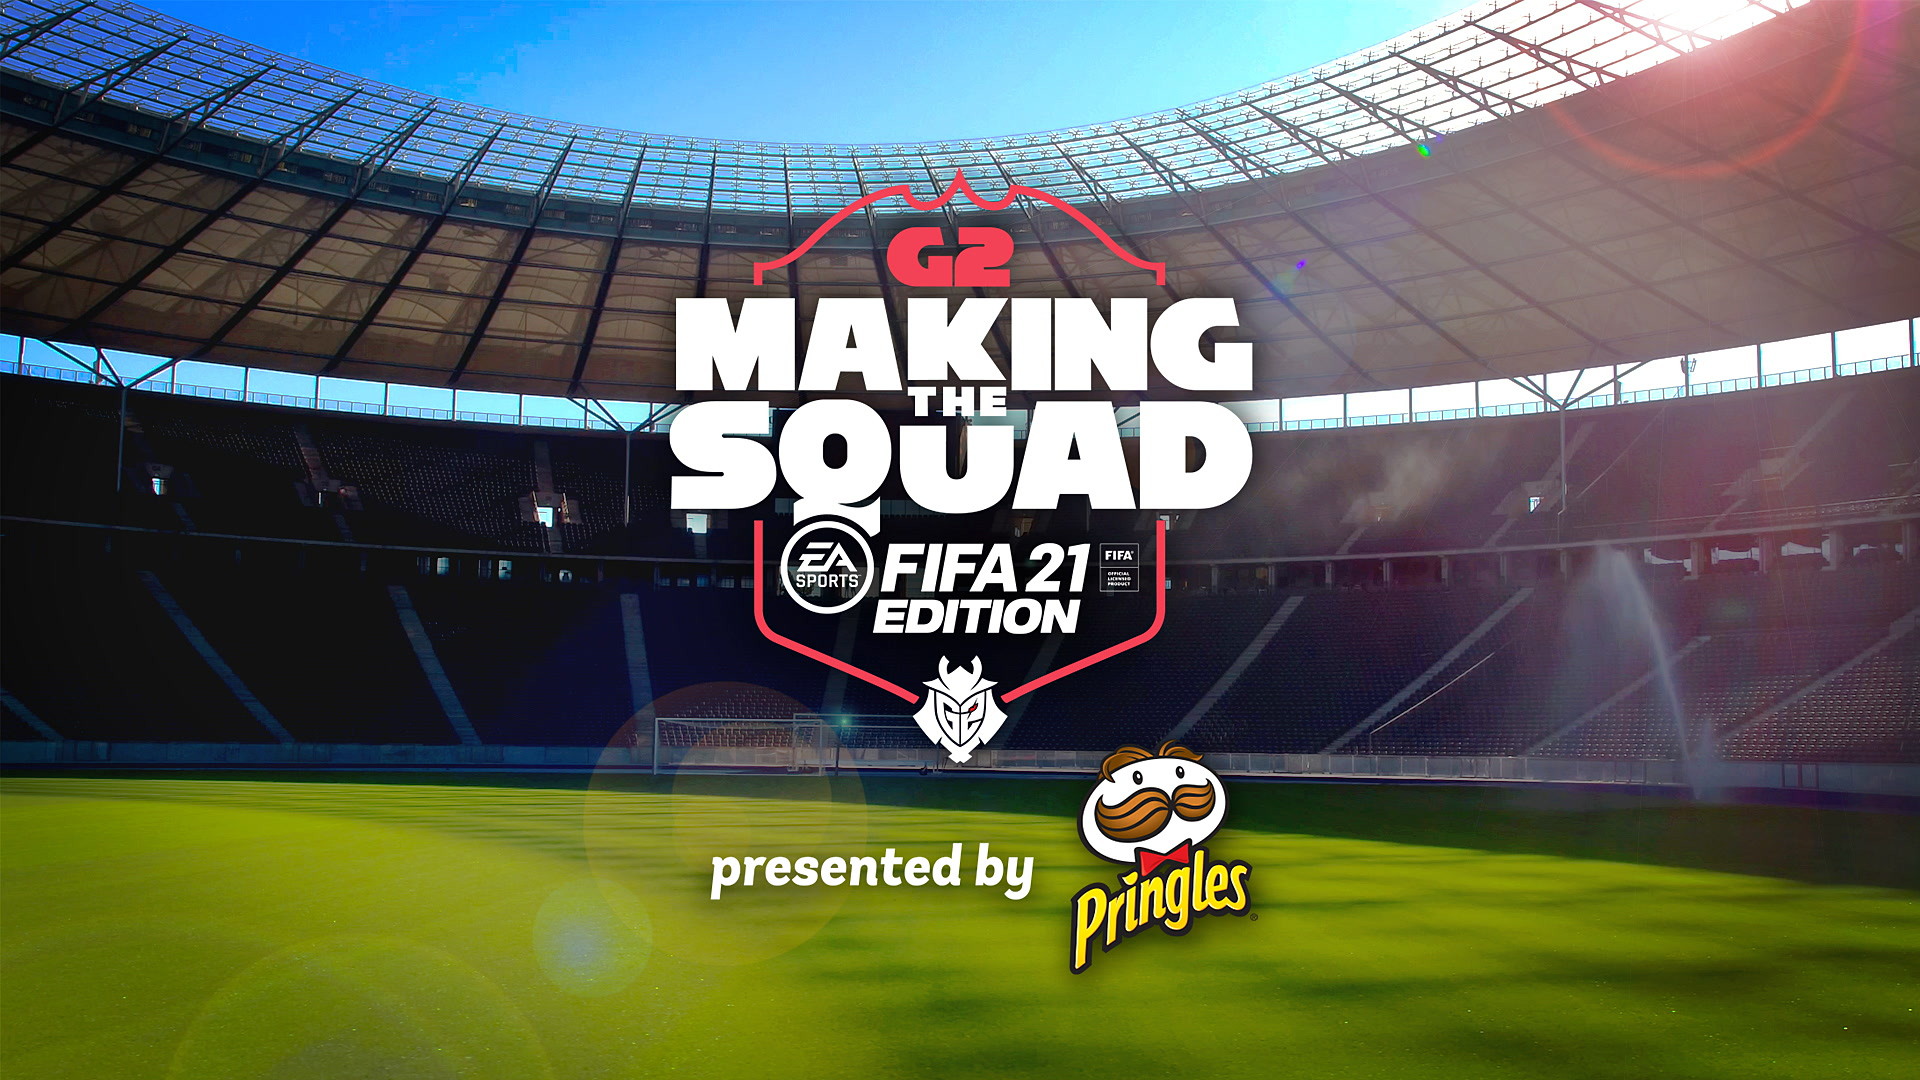 G2: Making the Squad - FIFA Edition